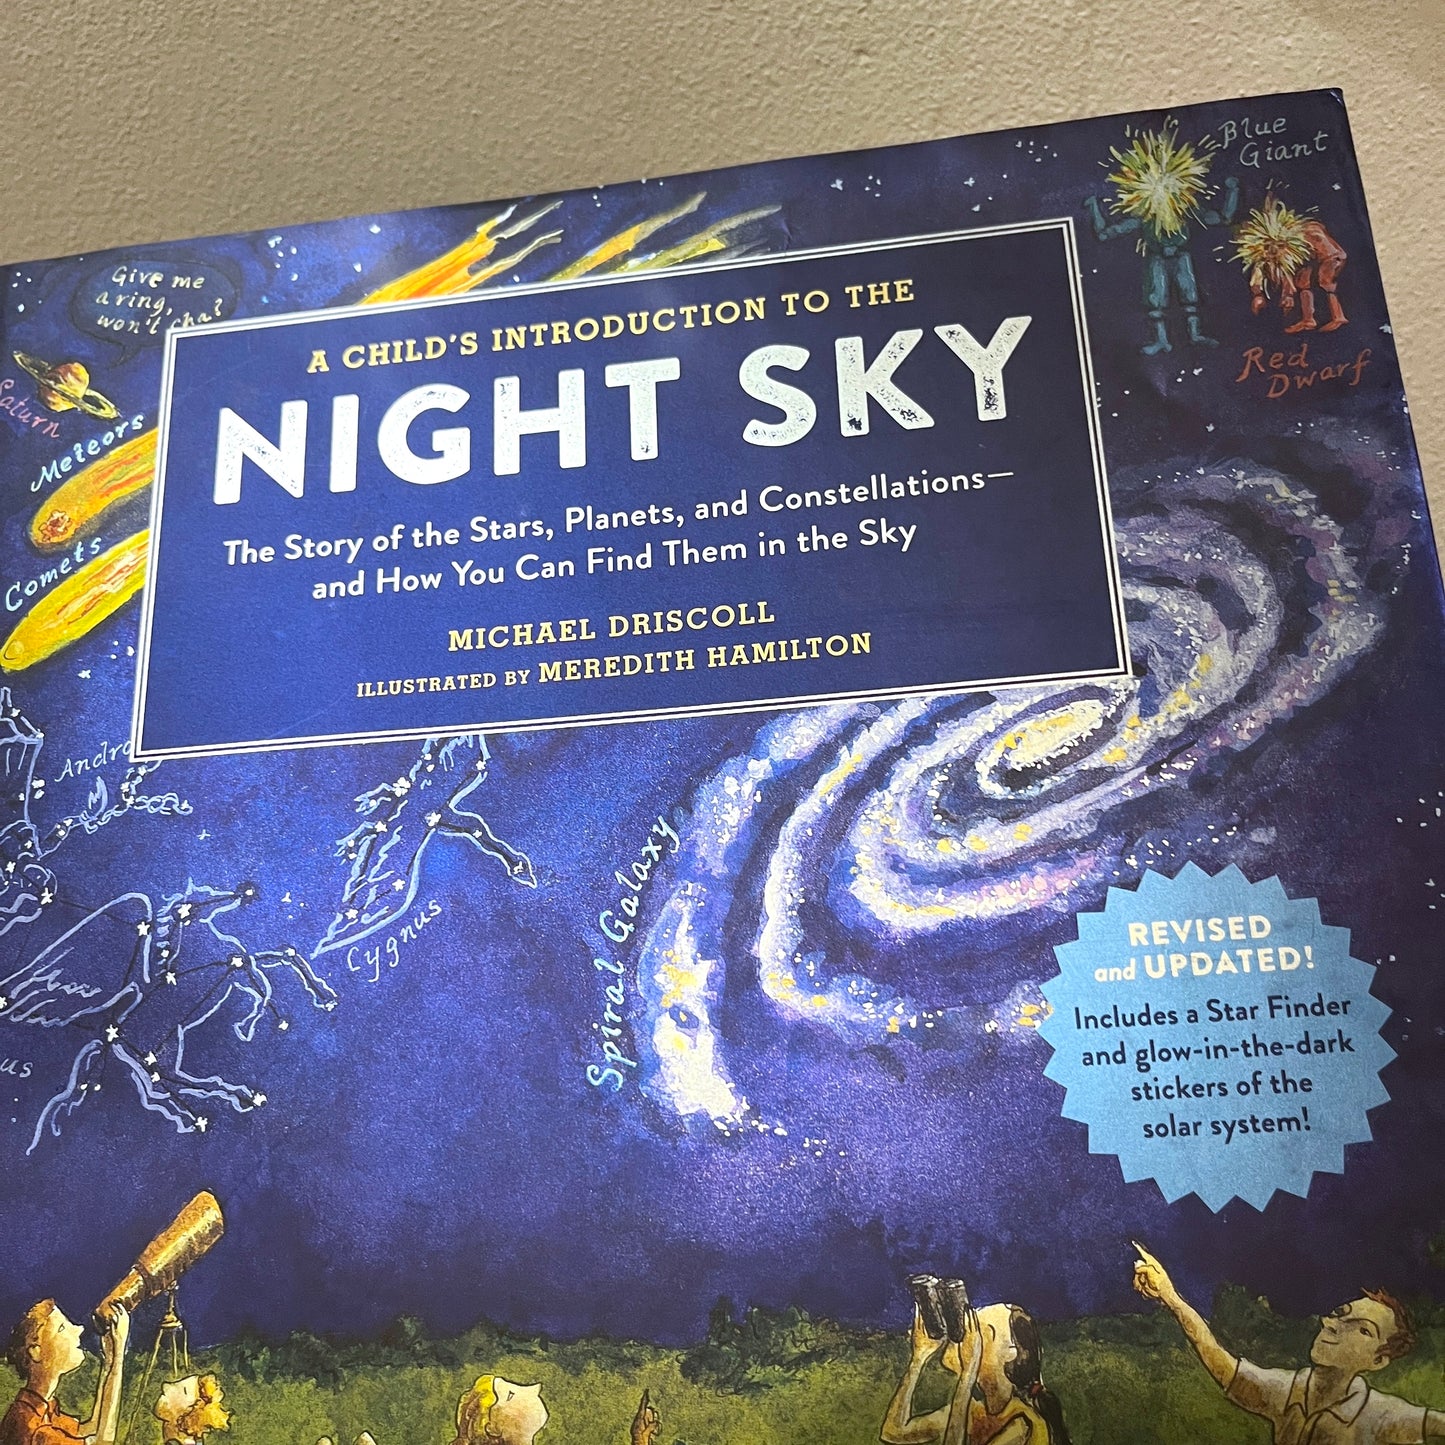 A Child's Introduction to the Night Sky - Michael Driscoll, Meredith Hamilton